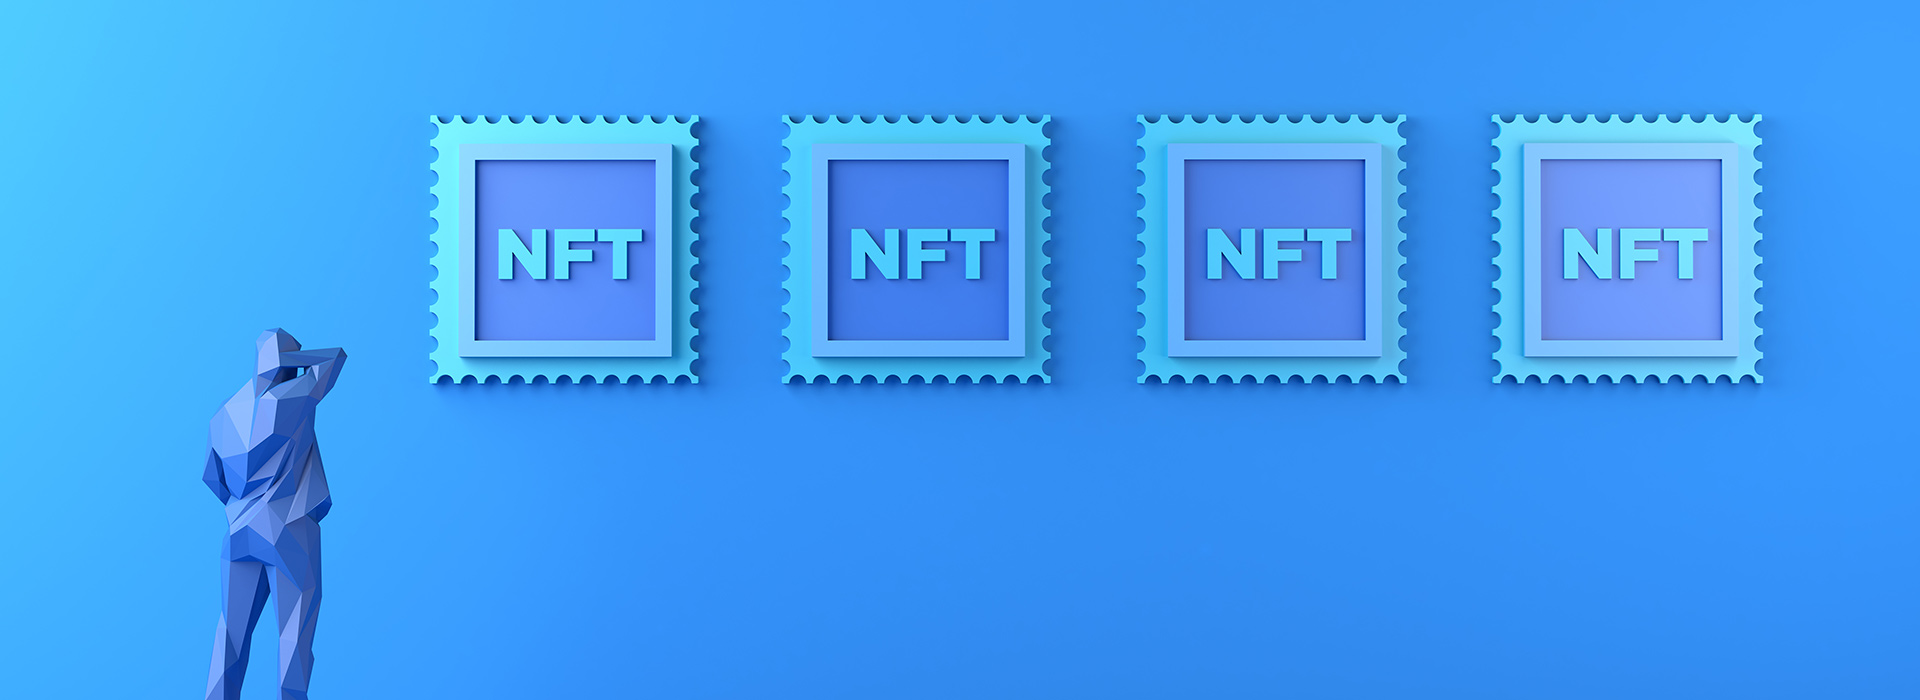 Developing Smart Contracts for Creating and Selling NFT Images